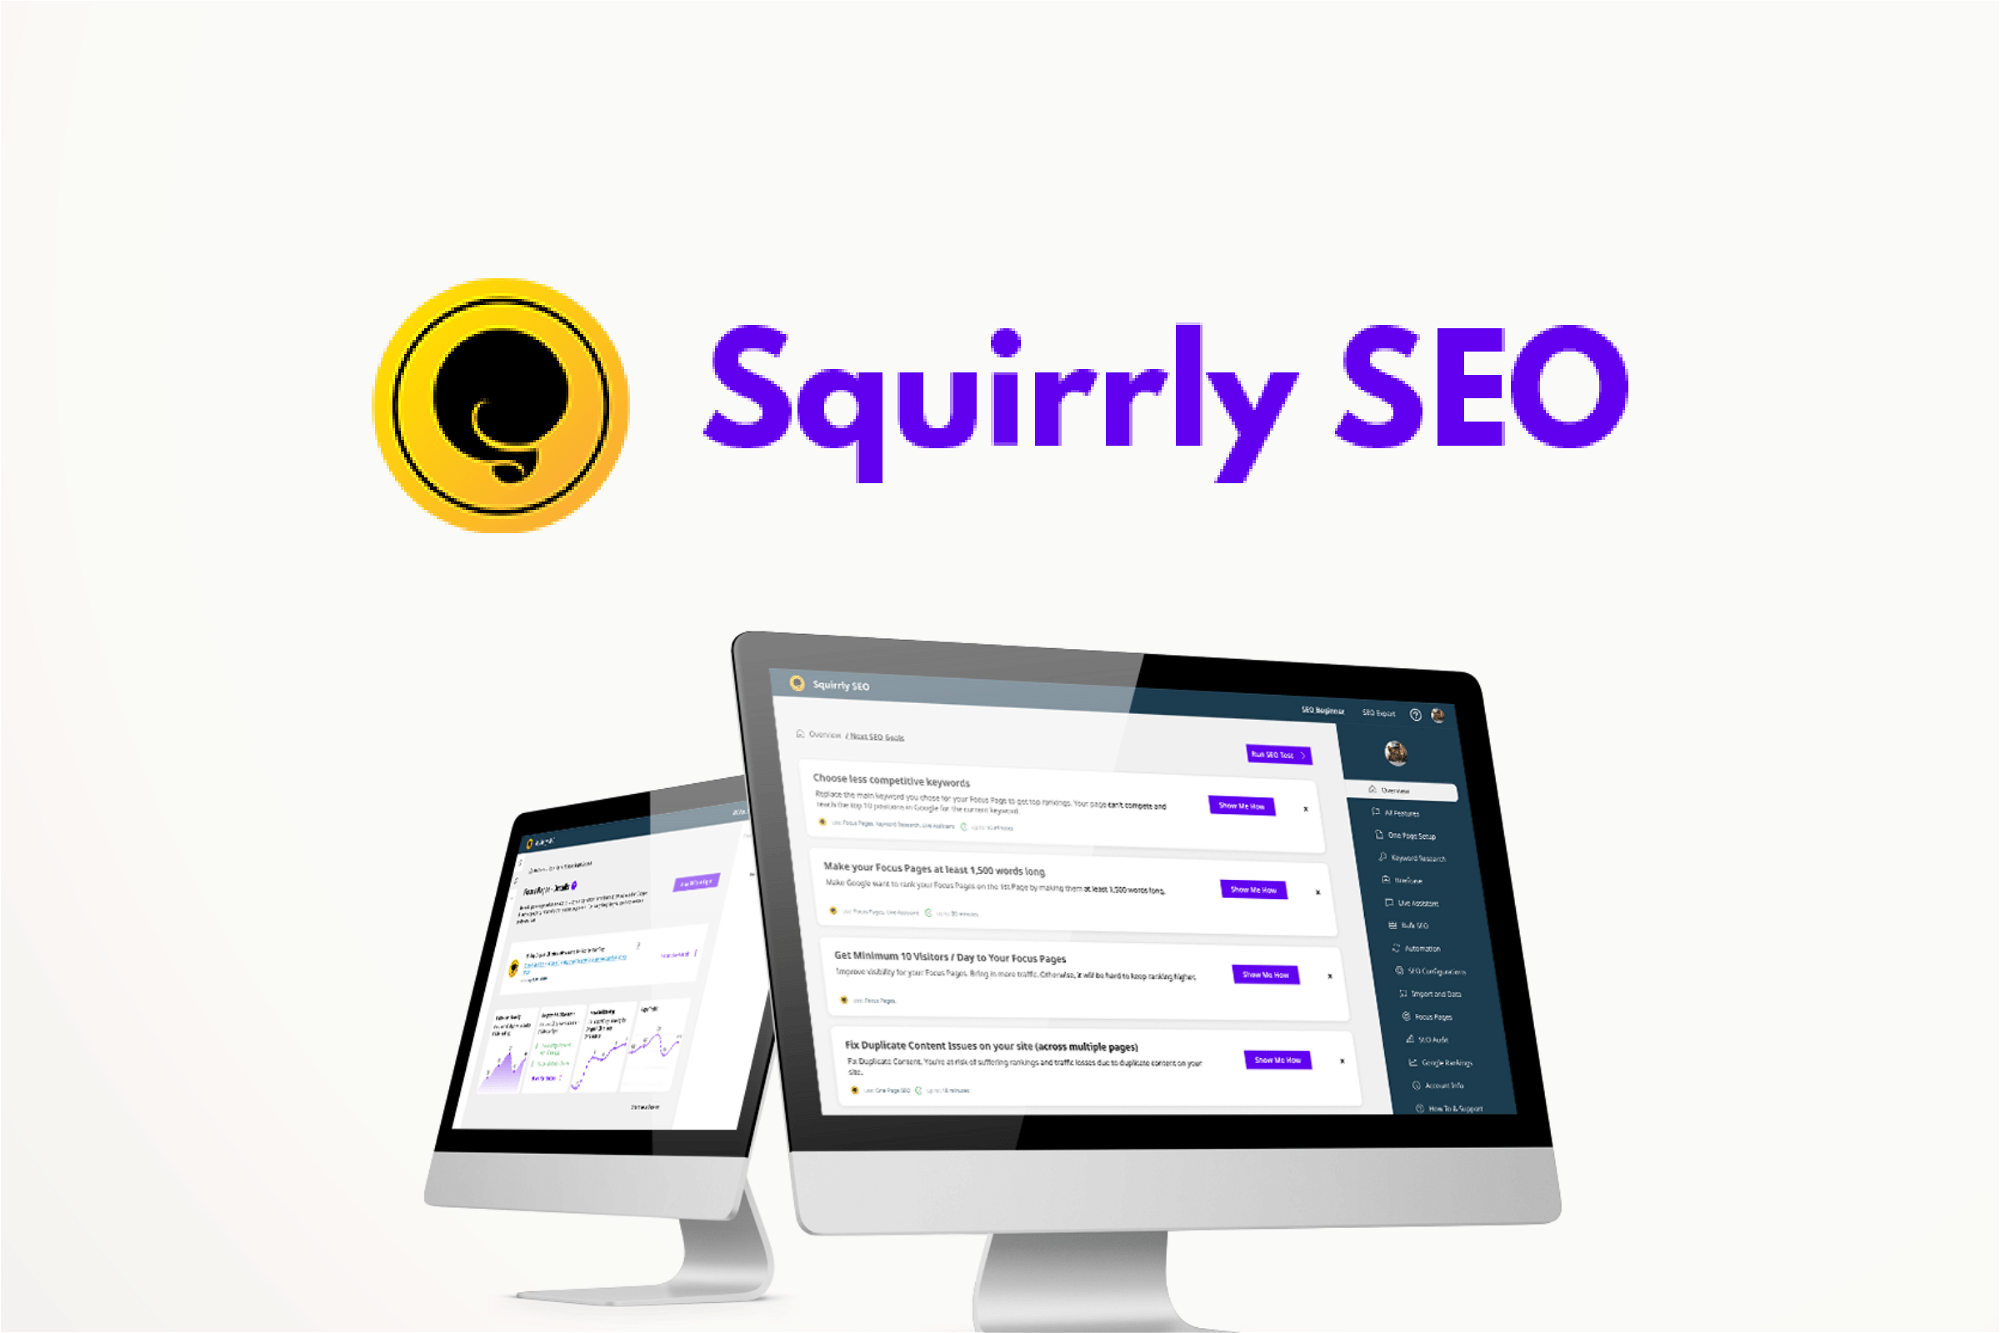 Squirrly SEO – Improve SEO with AI guidance